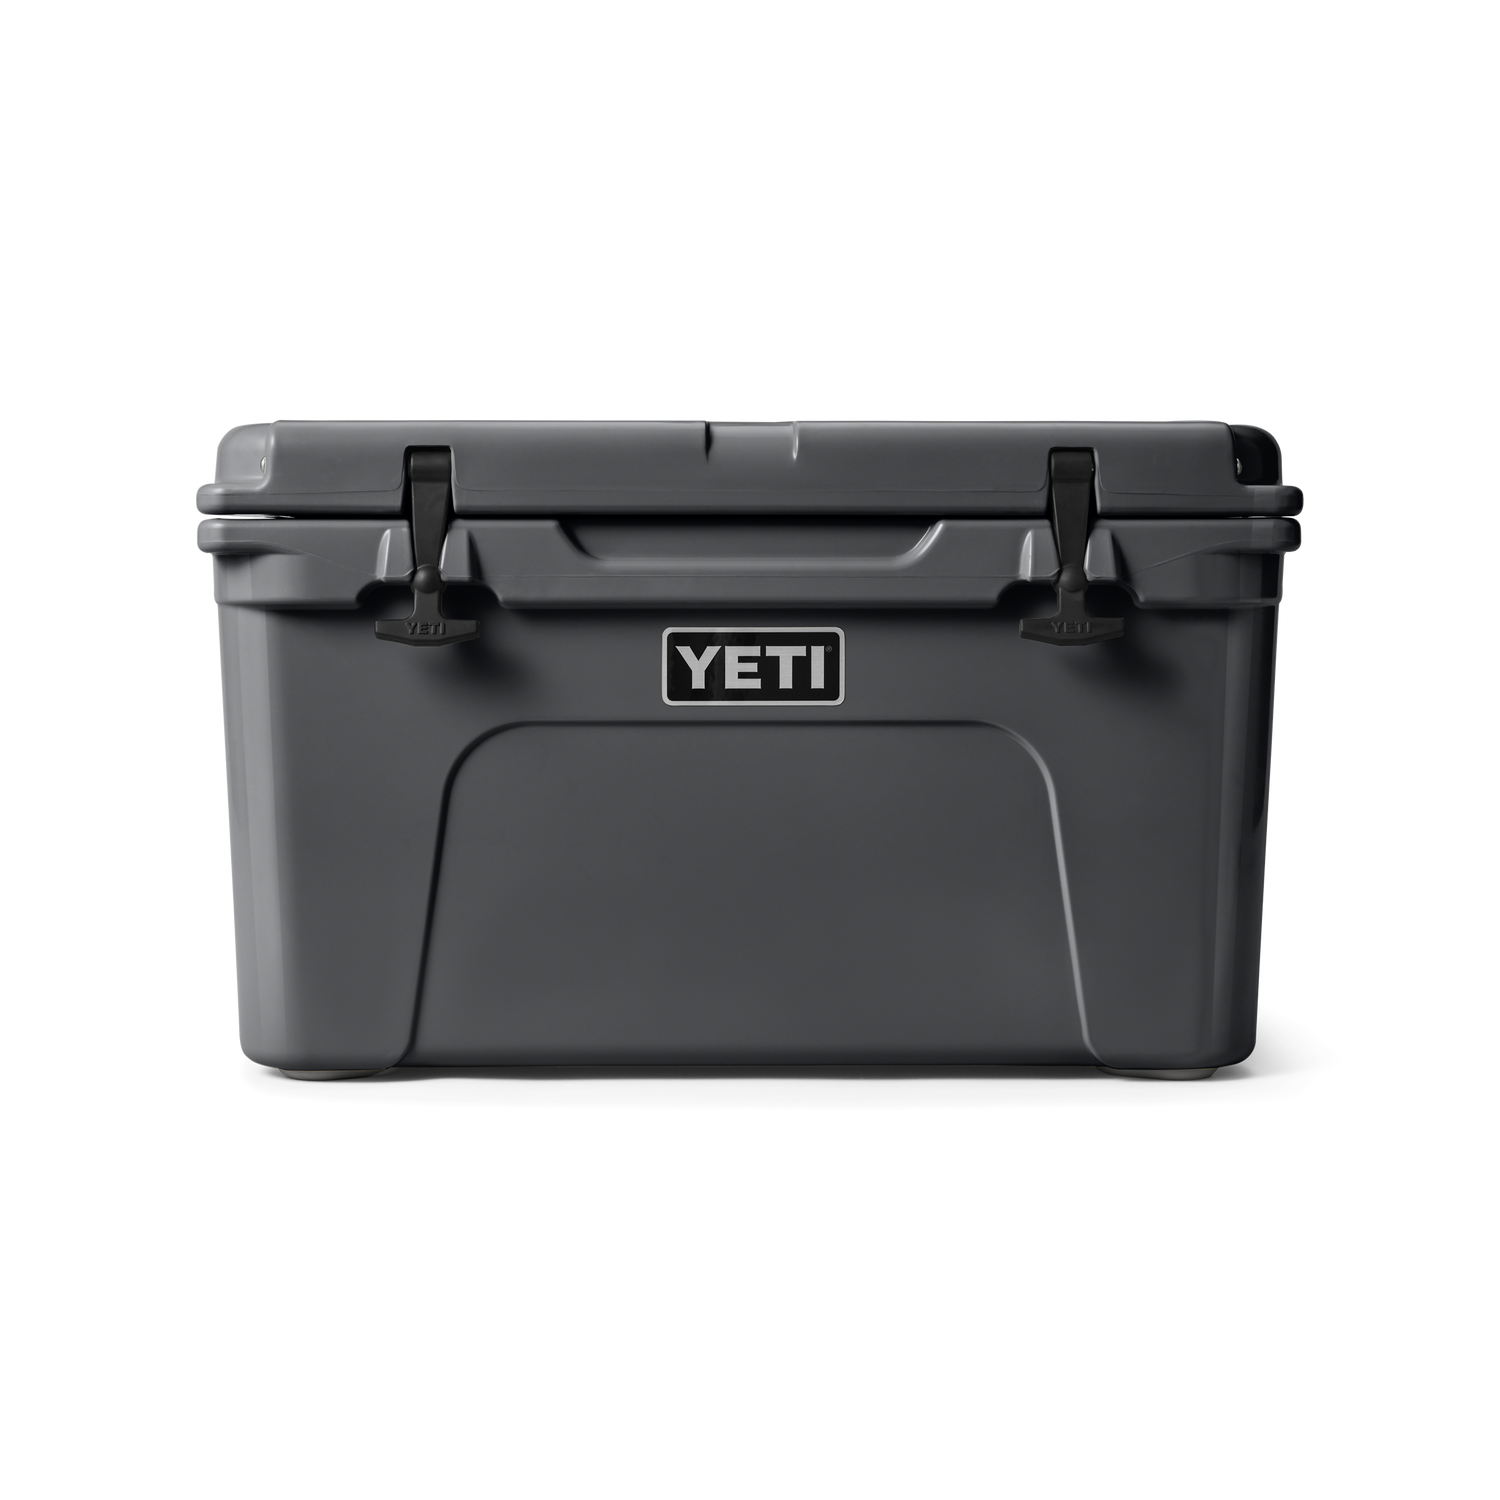 Yeti Cooler Colors: An All-Inclusive Guide